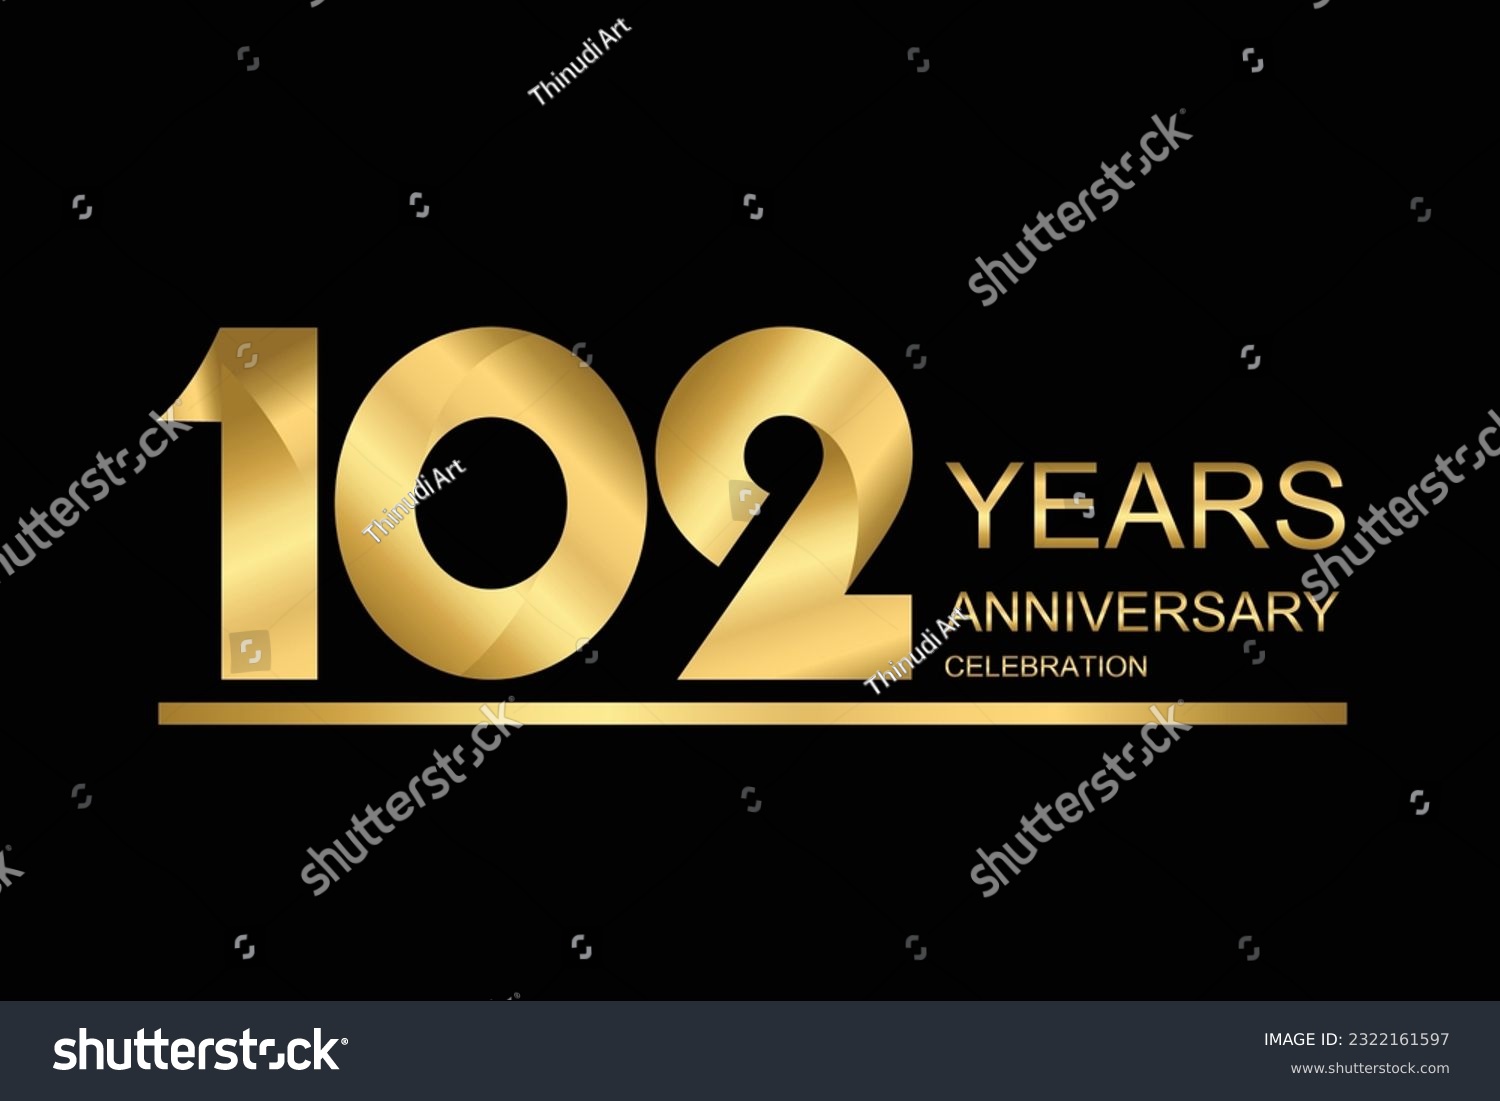 SVG of 102 year anniversary vector banner template. gold icon isolated on black background. svg